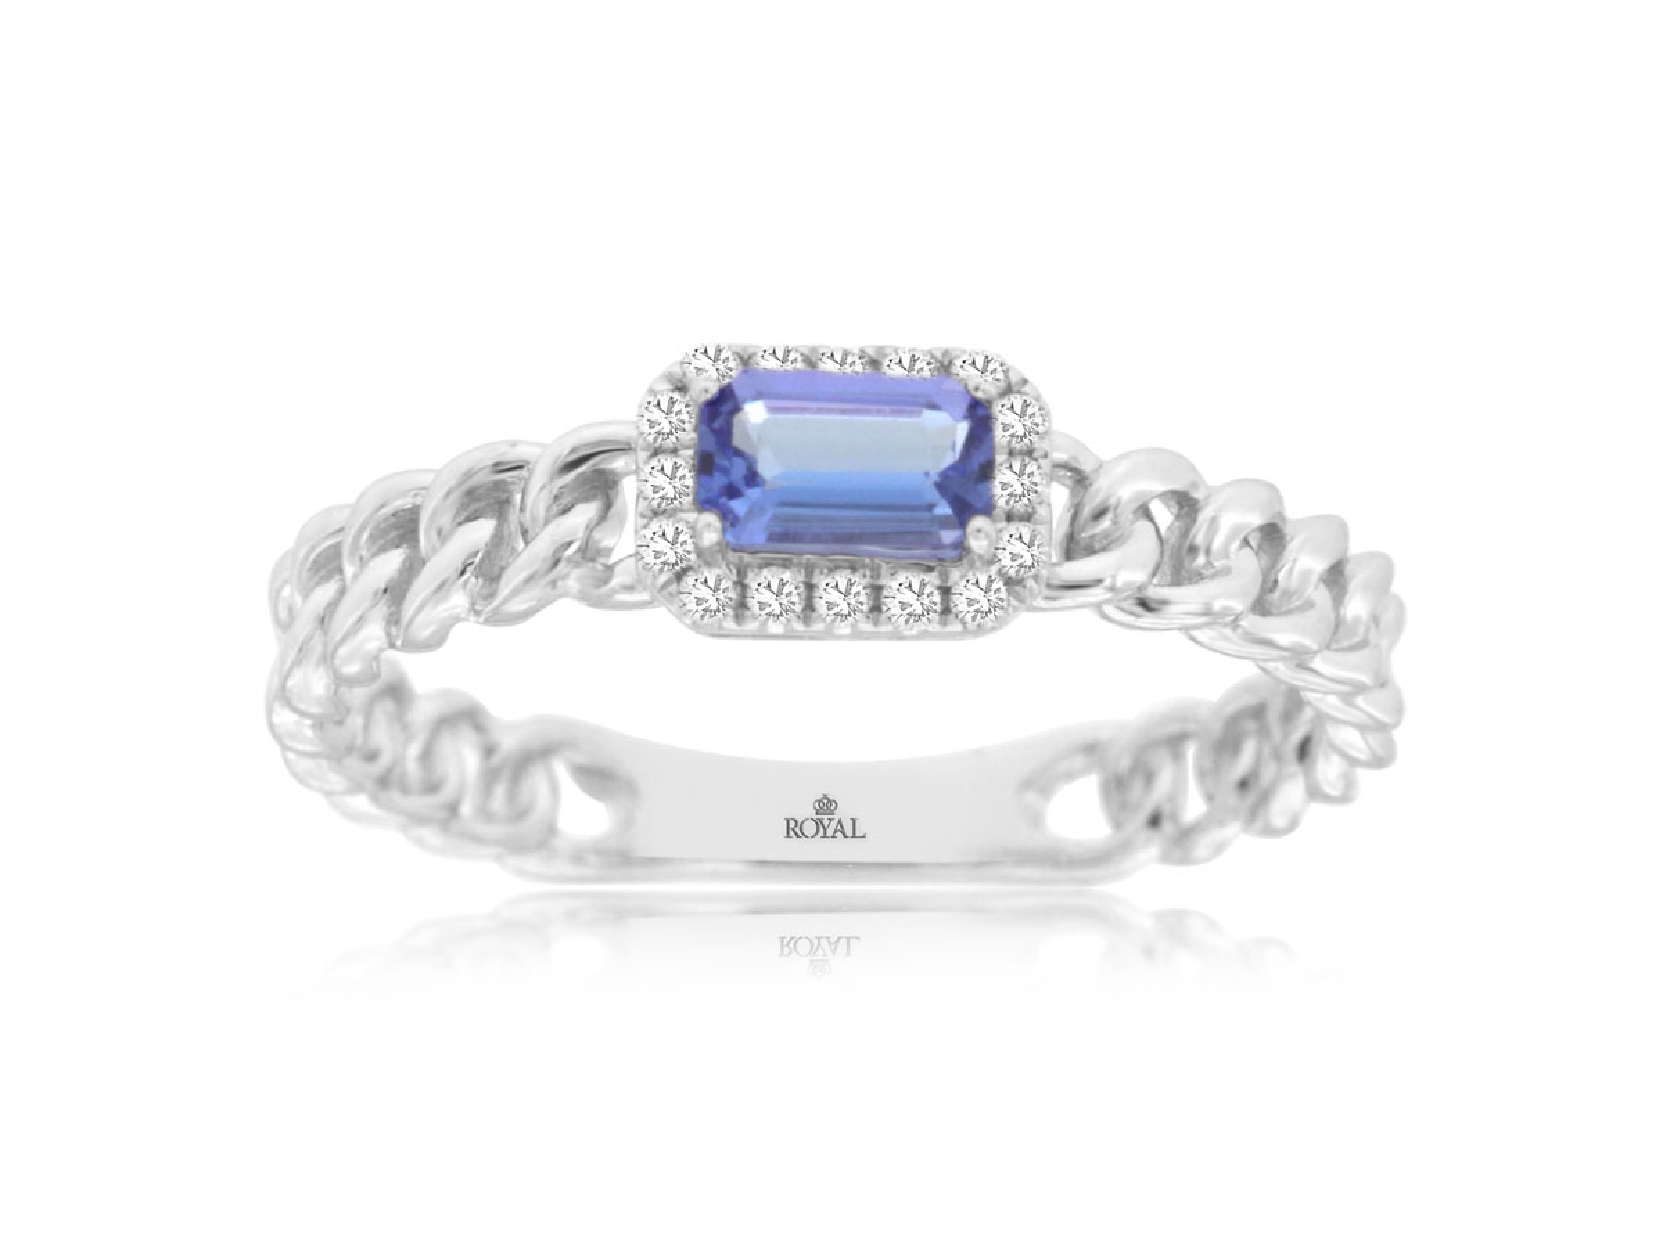 14K White Gold Emerald Cut Tanzanite Ring With Diamond Halo and Chain Link Shank; Size 7
0.32CTTW Tanzanite
0.07CTTW Diamonds